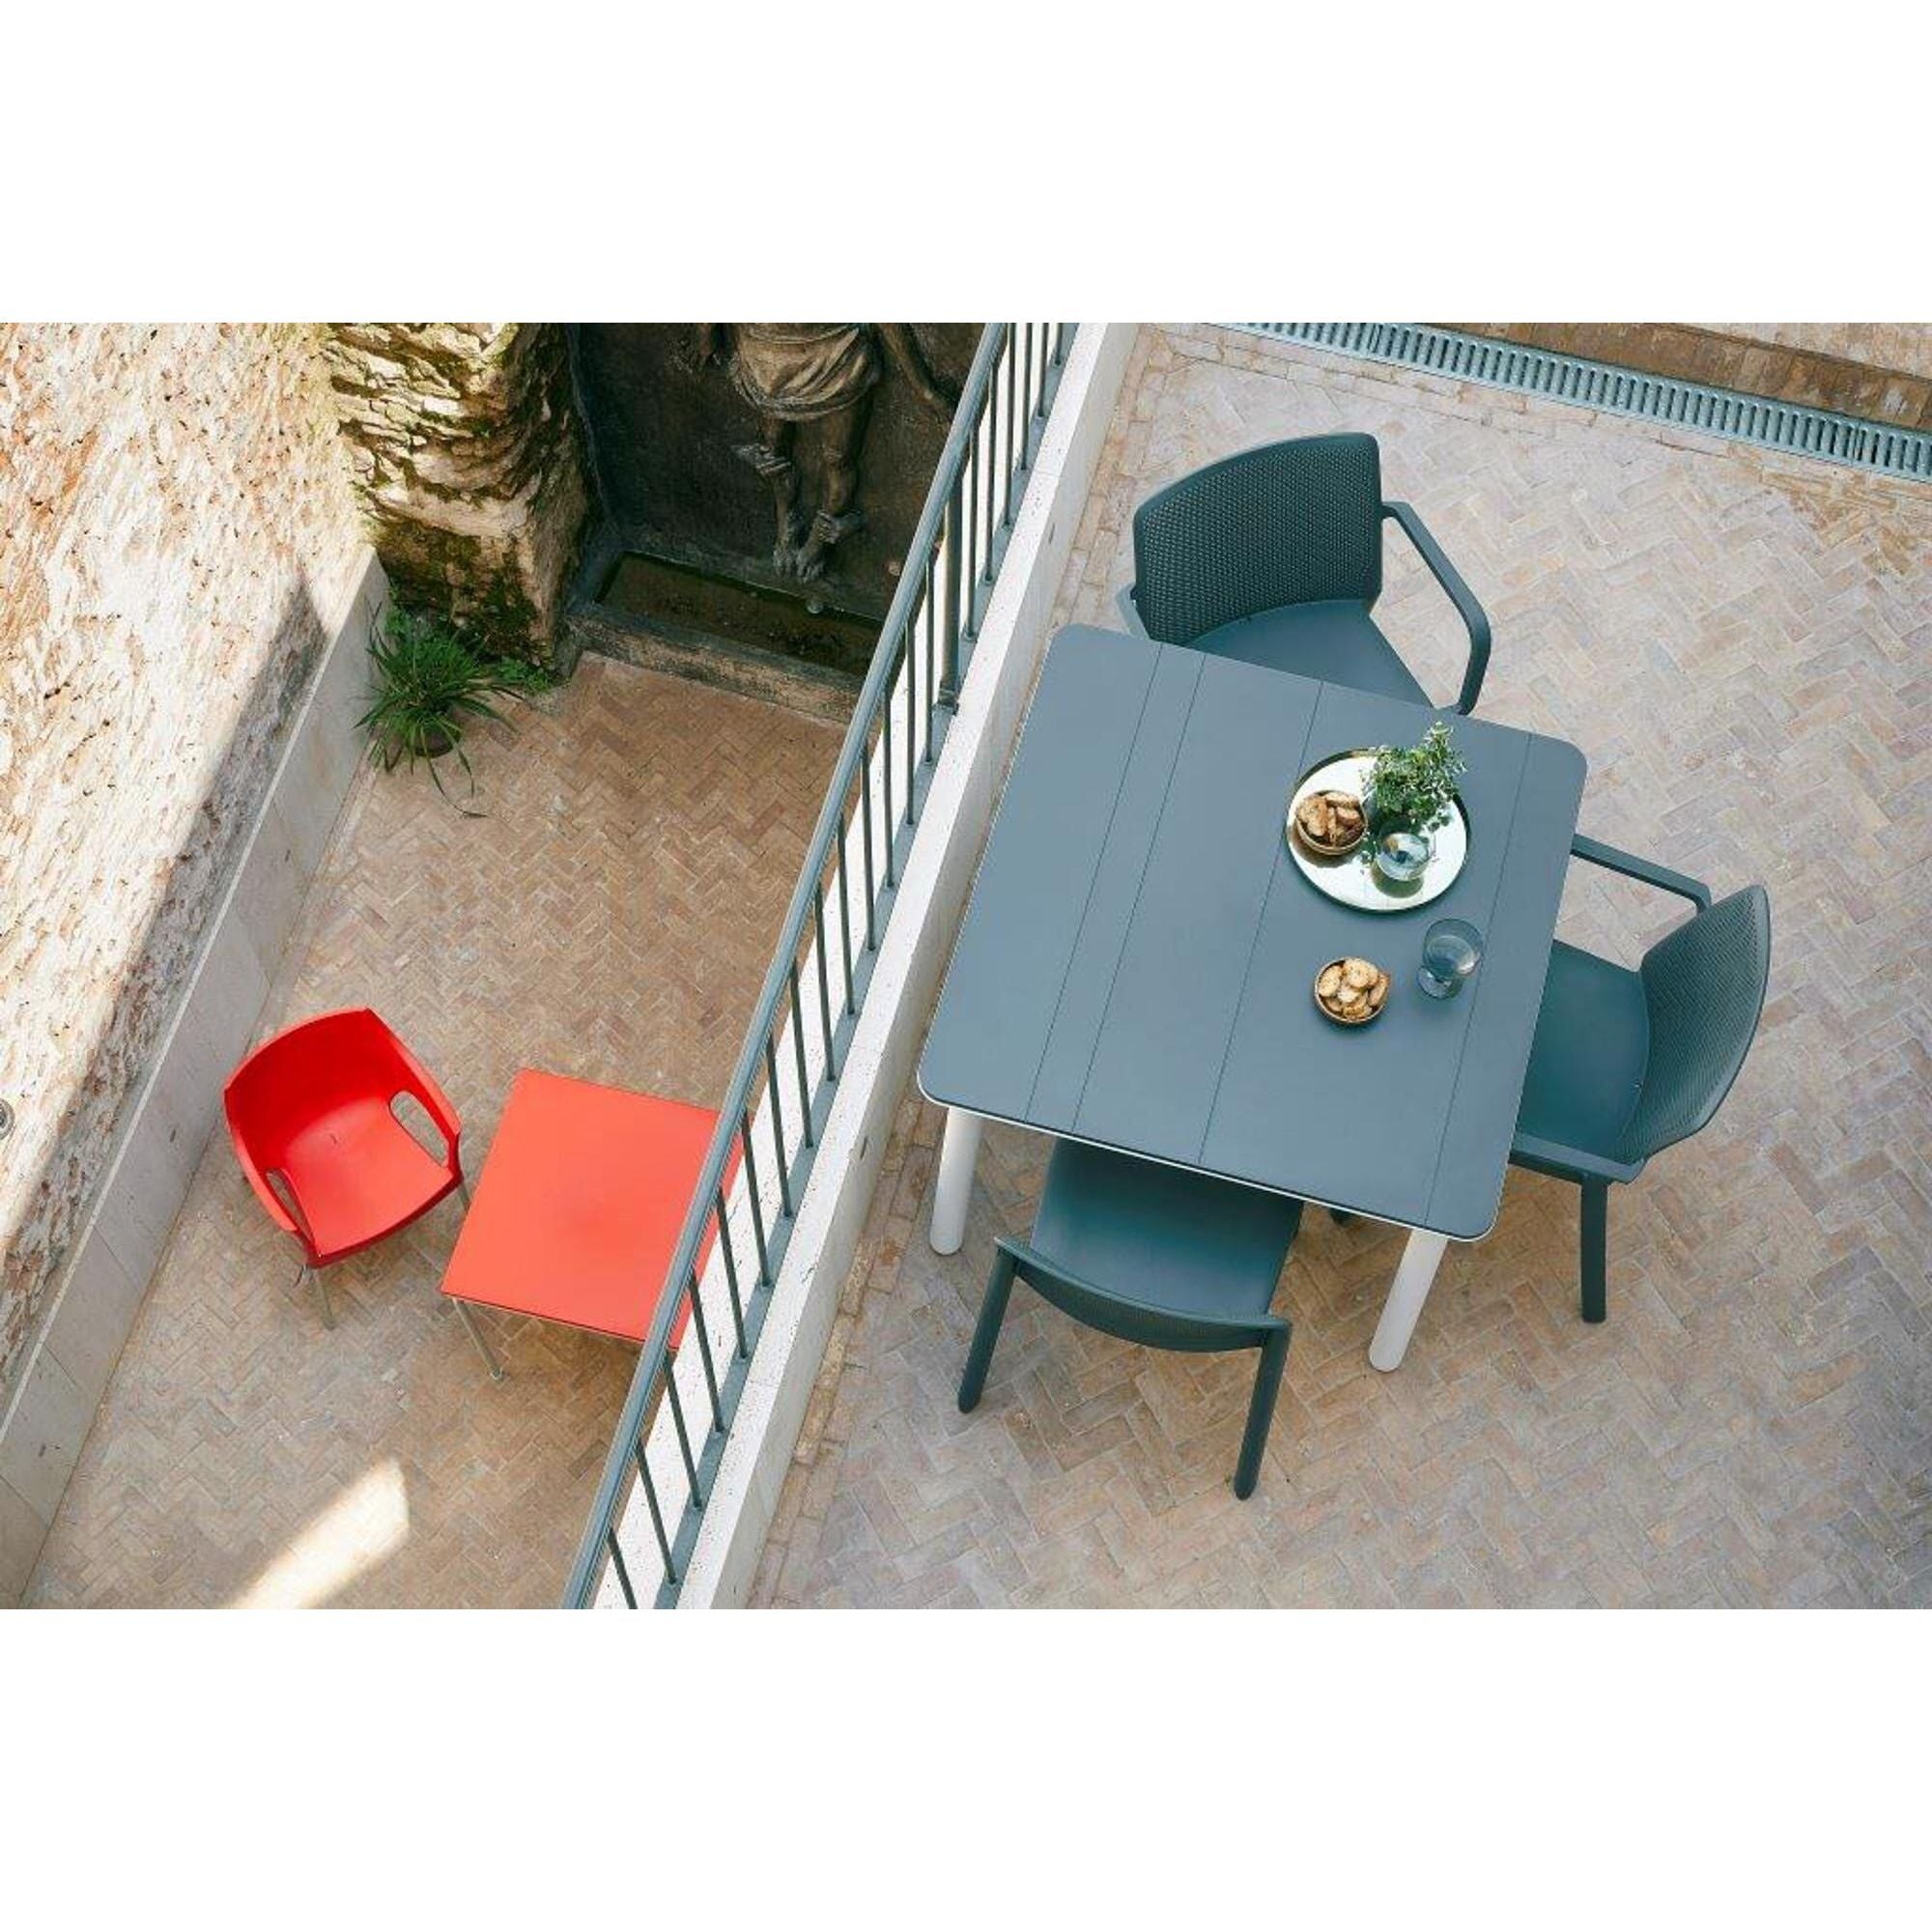 Resol noa square table indoors, outdoors 90x90 white base -